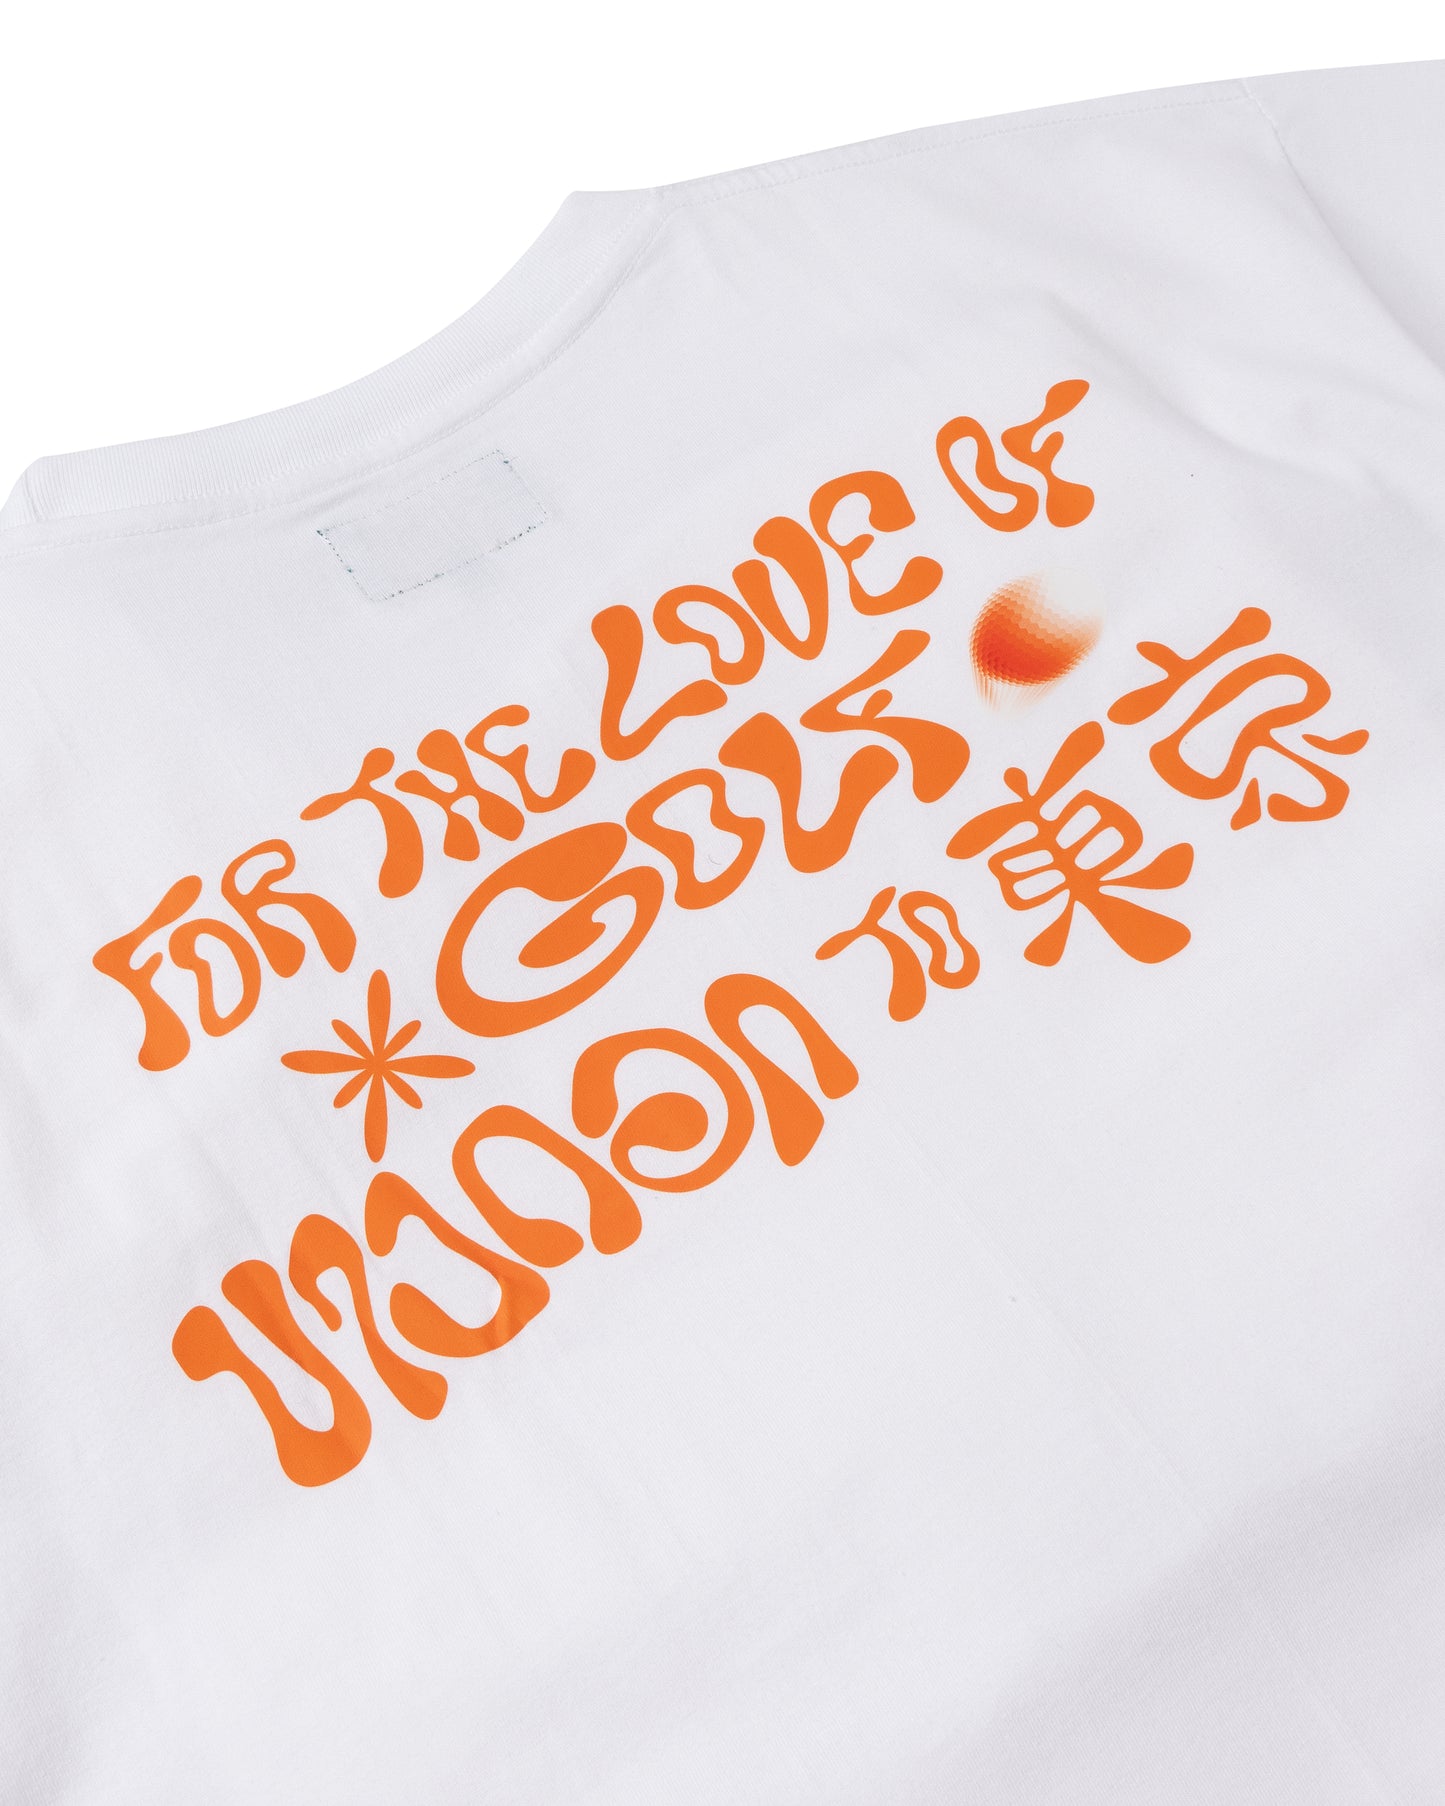 Loom 19 x Mid 90s Club: For The Love Of Golf T-Shirt